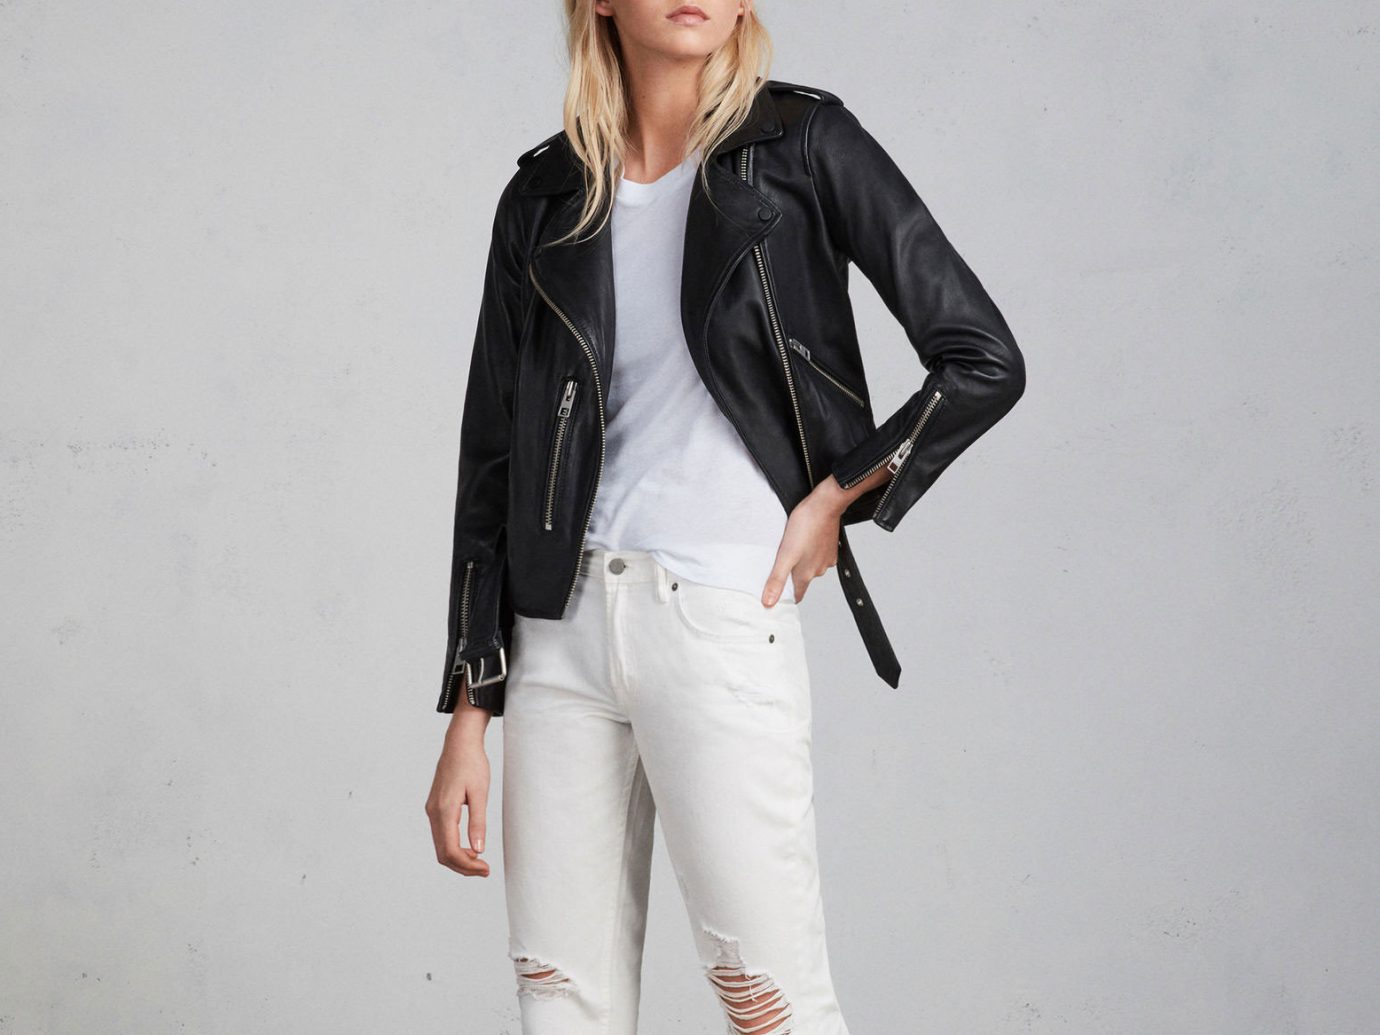 Packing Tips Style + Design Travel Shop person white clothing jacket fashion model leather jacket leather fashion material suit top trouser shoe coat posing dressed